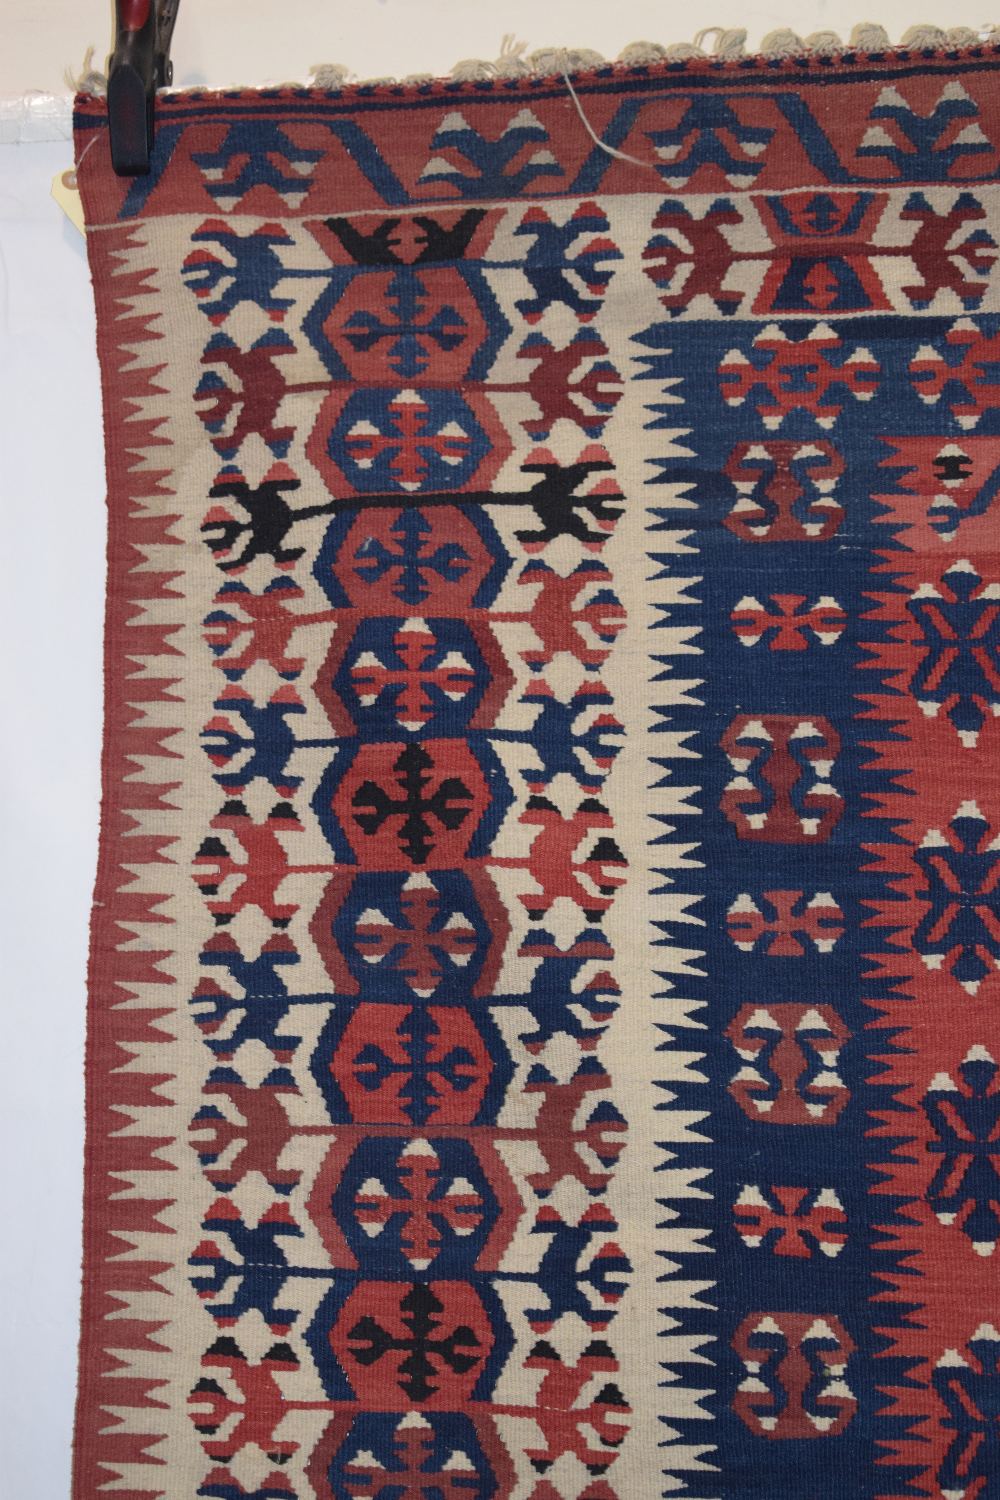 Two Anatolian rugs, the first: Konya kelim, central Anatolia, circa 1940s-50s, 4ft. 11in. X 3ft. - Image 4 of 17